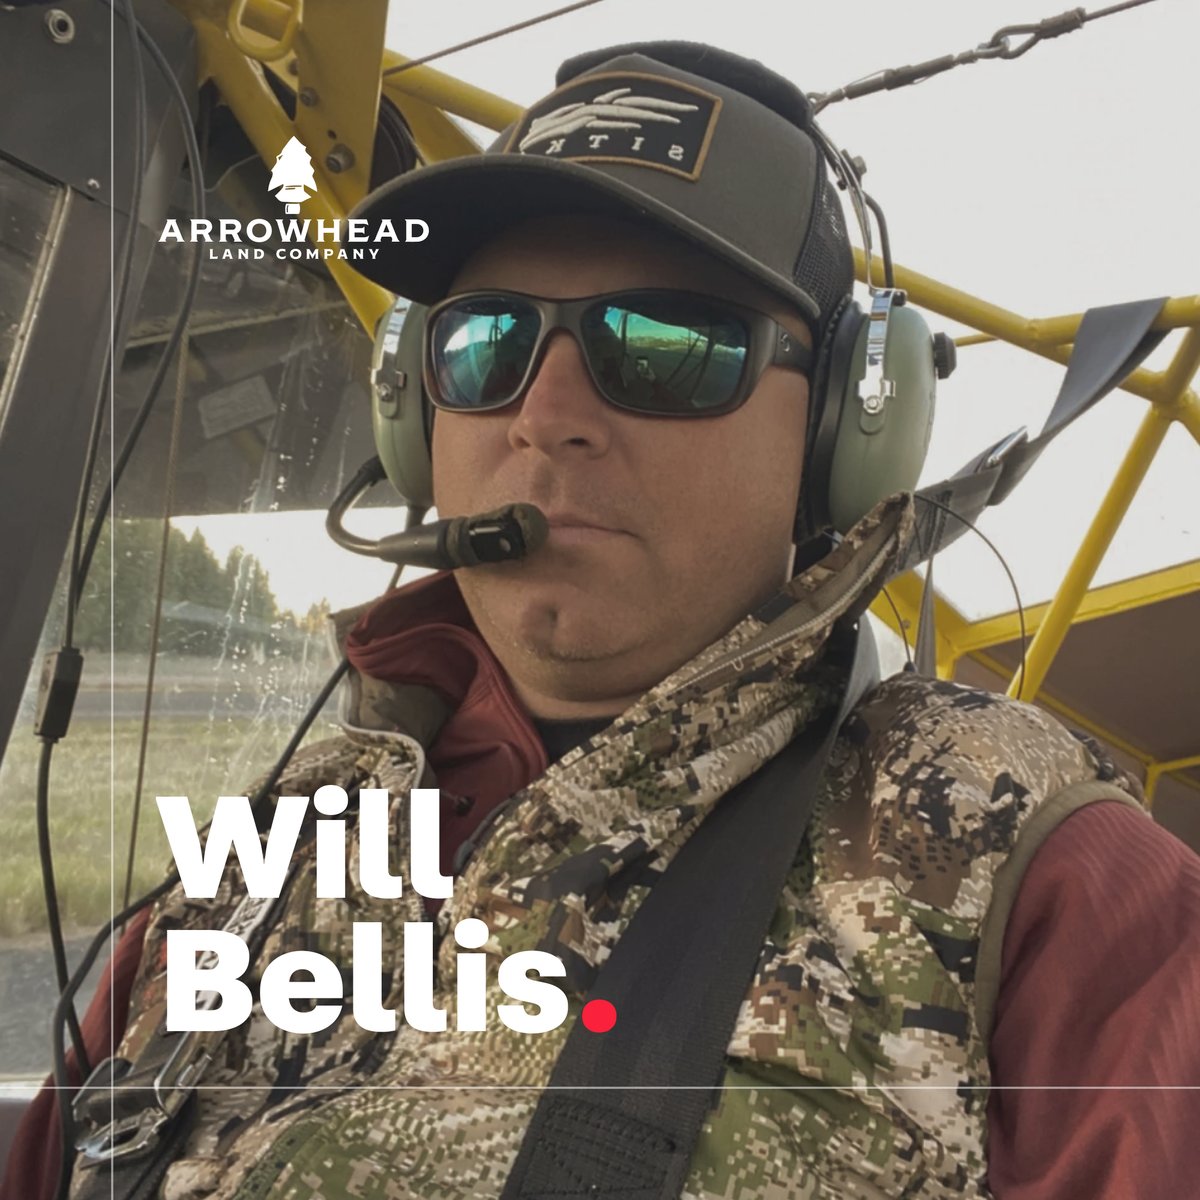 Meet Will Bellis, an Accredited Land Consultant and Broker with Arrowhead Land Company! Learn more about how Will uses Land id™ for his listings by visiting the link in bio^

#propertymapping #landidentity #property #realestate #mobileapp #propertyboundaries #propertyinfo